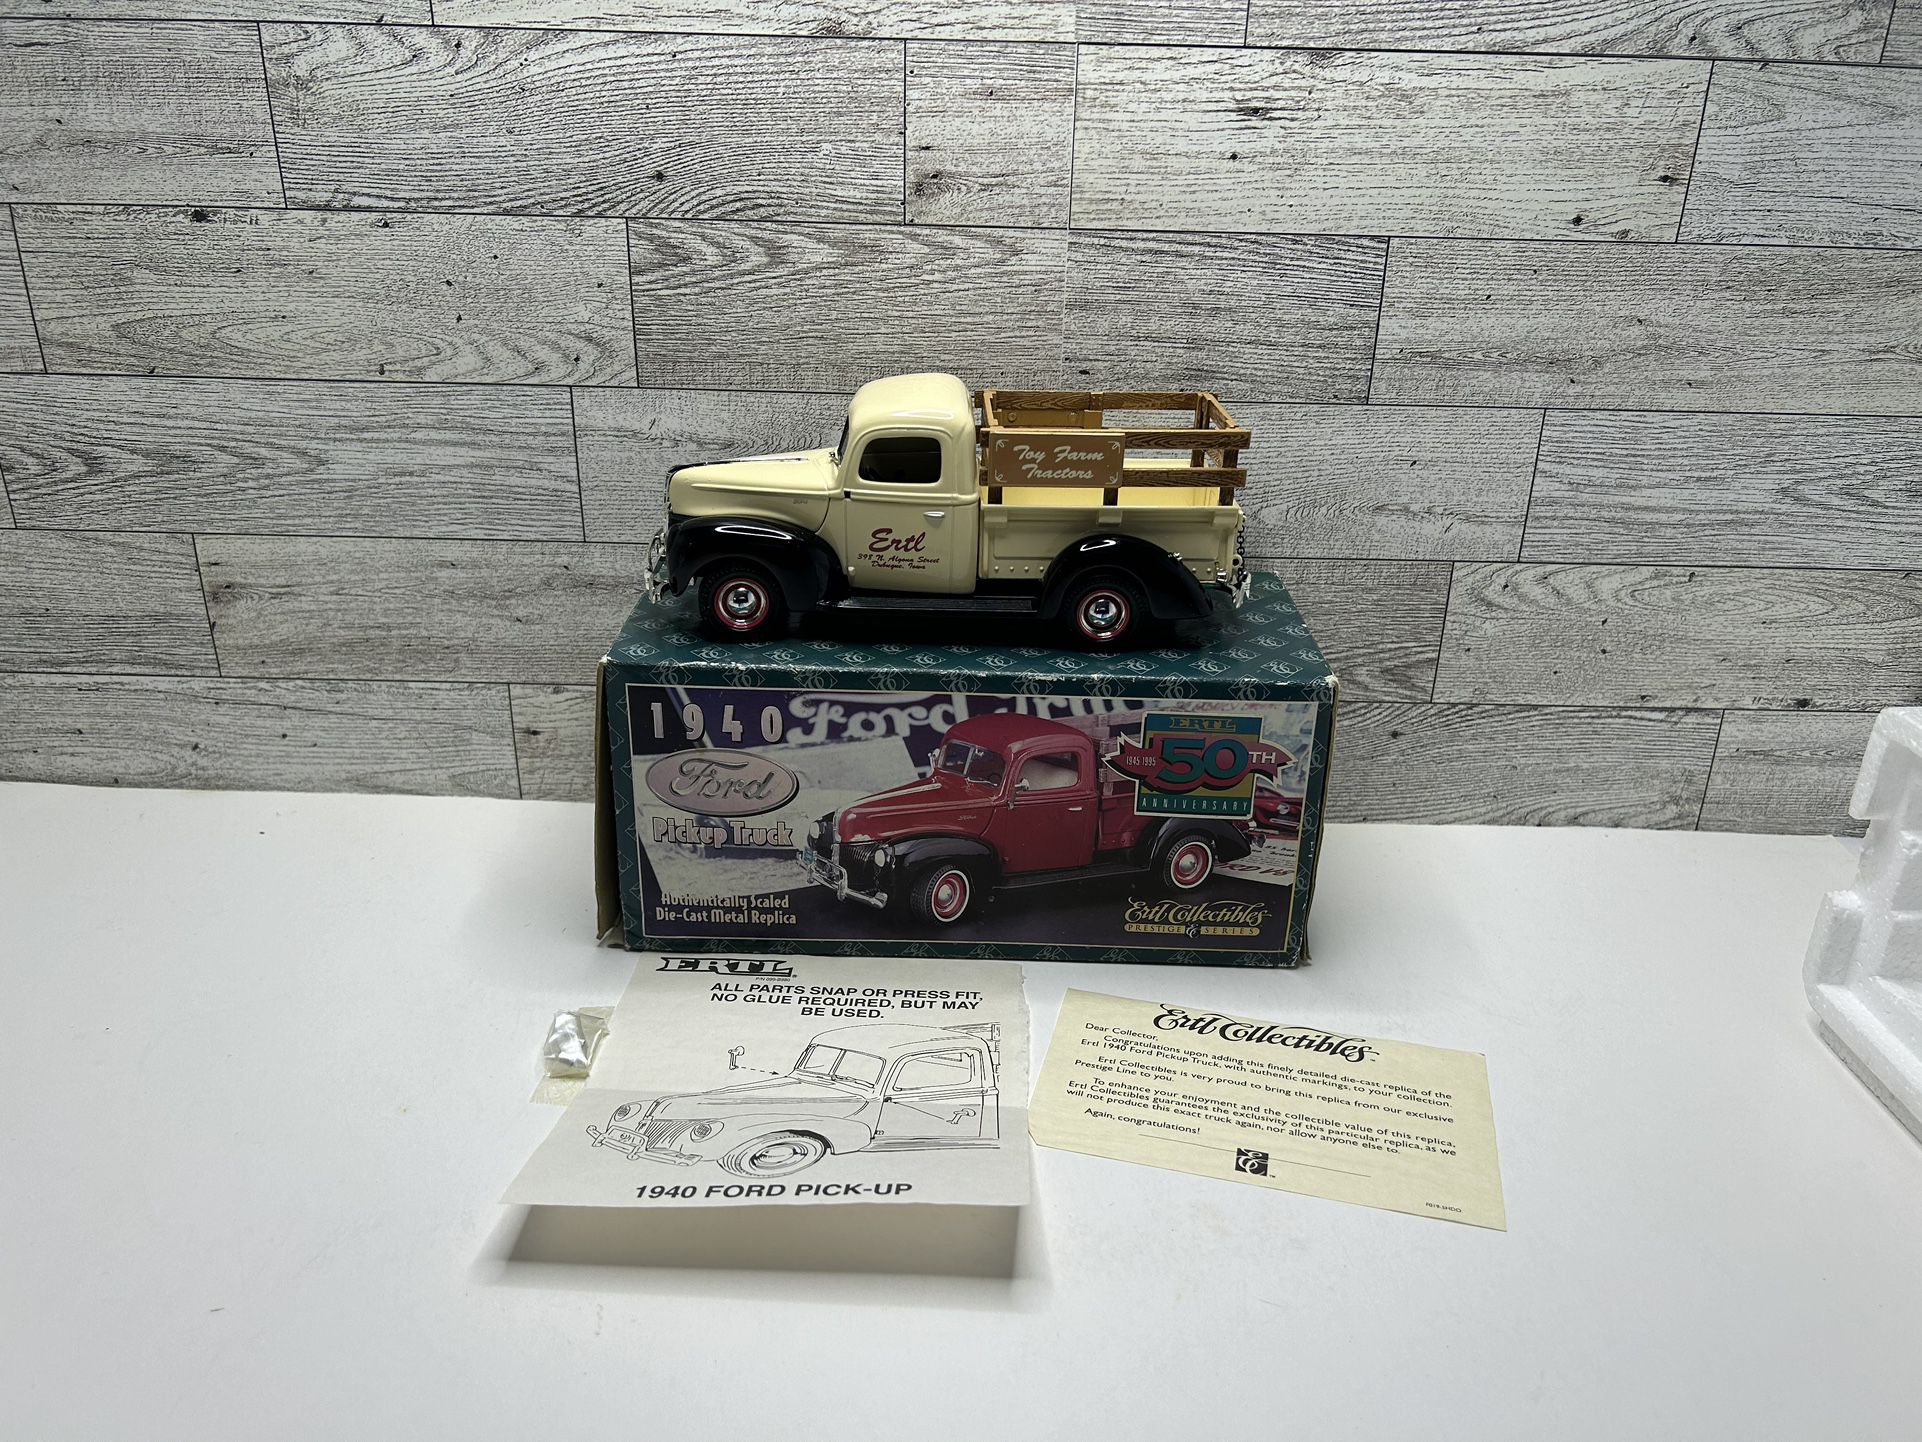 ERTL Collectibles Prestige Series Beige ‘1940 Ford Pickup Truck 50th Anniversary • Die Cast Metal • Made in China Scale 1:25